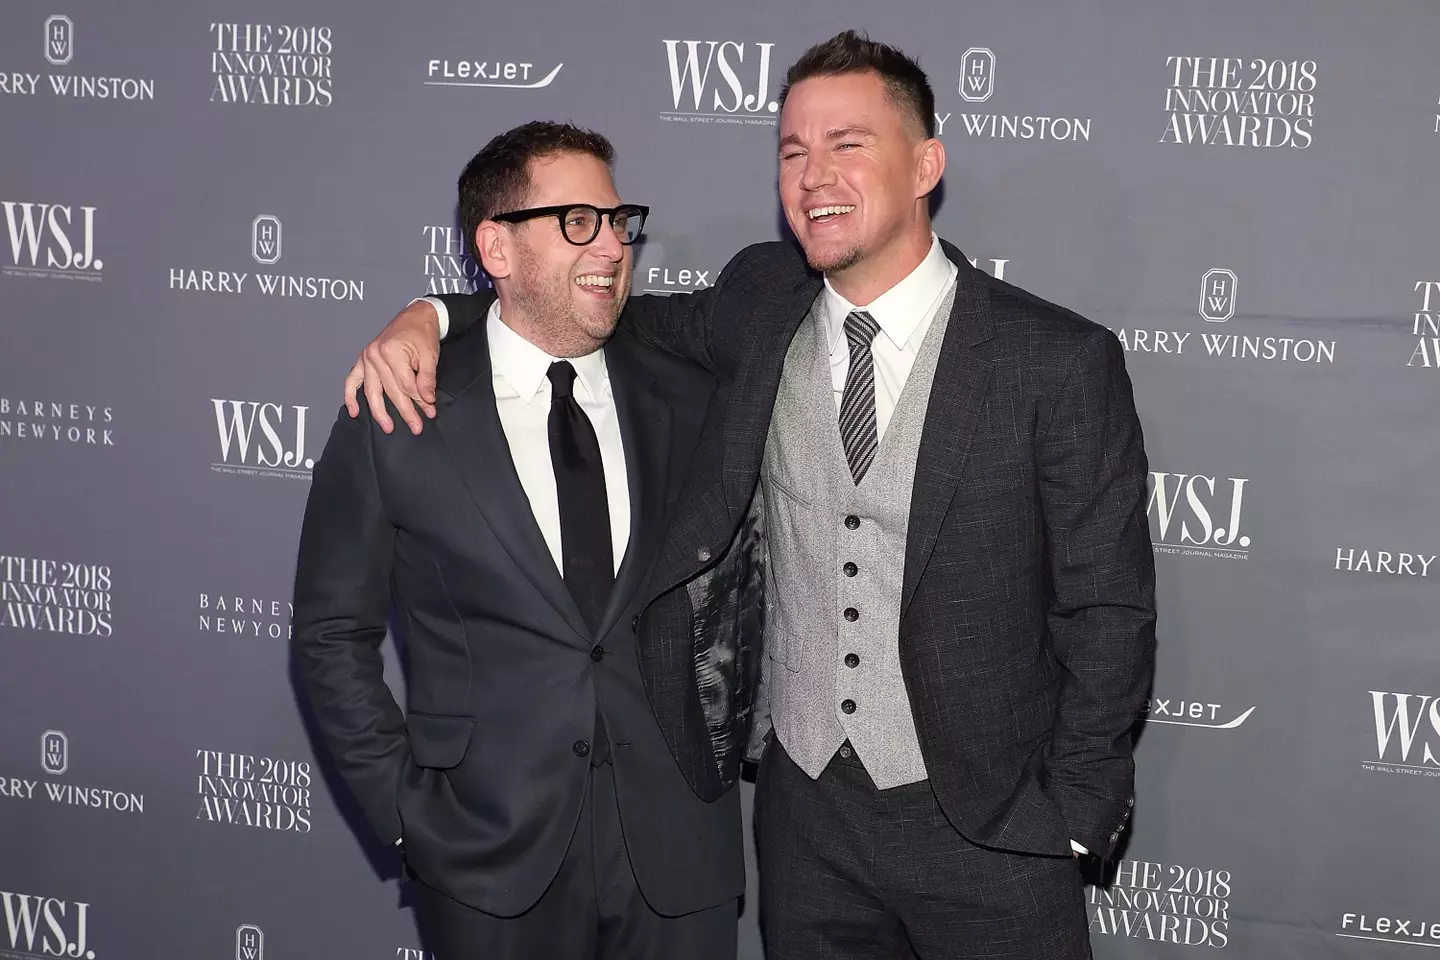 Channing Tatum said he would 'love' to work with Jonah Hill again. (Taylor Hill/WireImage)